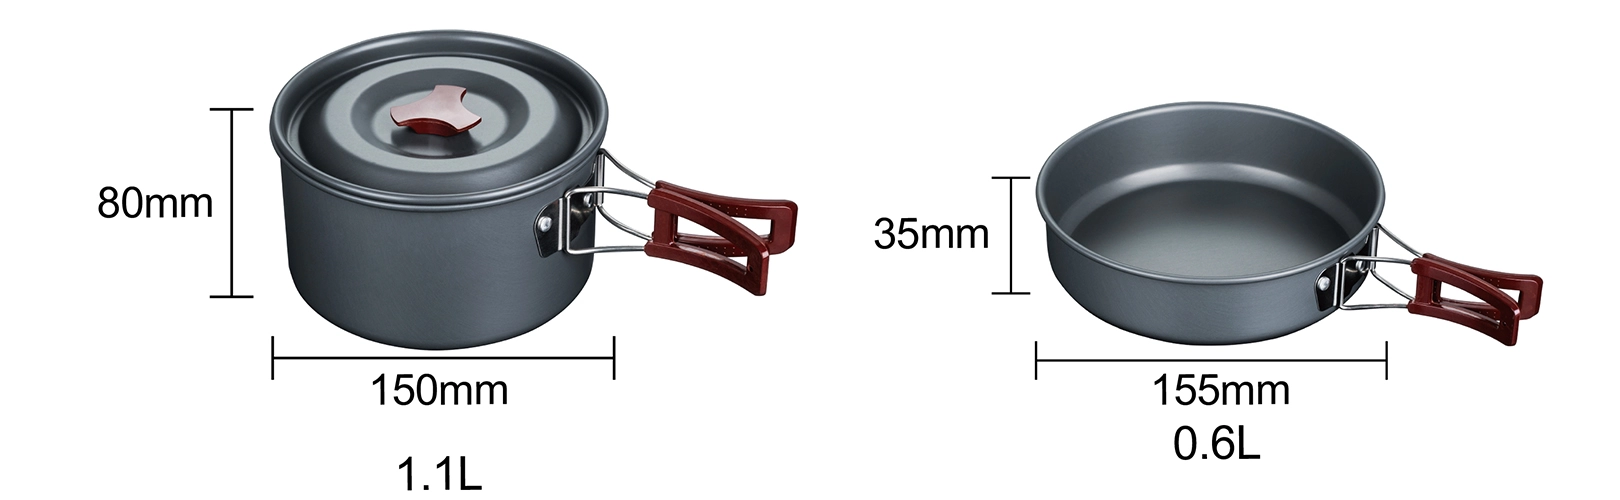 details of Lightweight Aluminum Cooking Set for Solo Camping